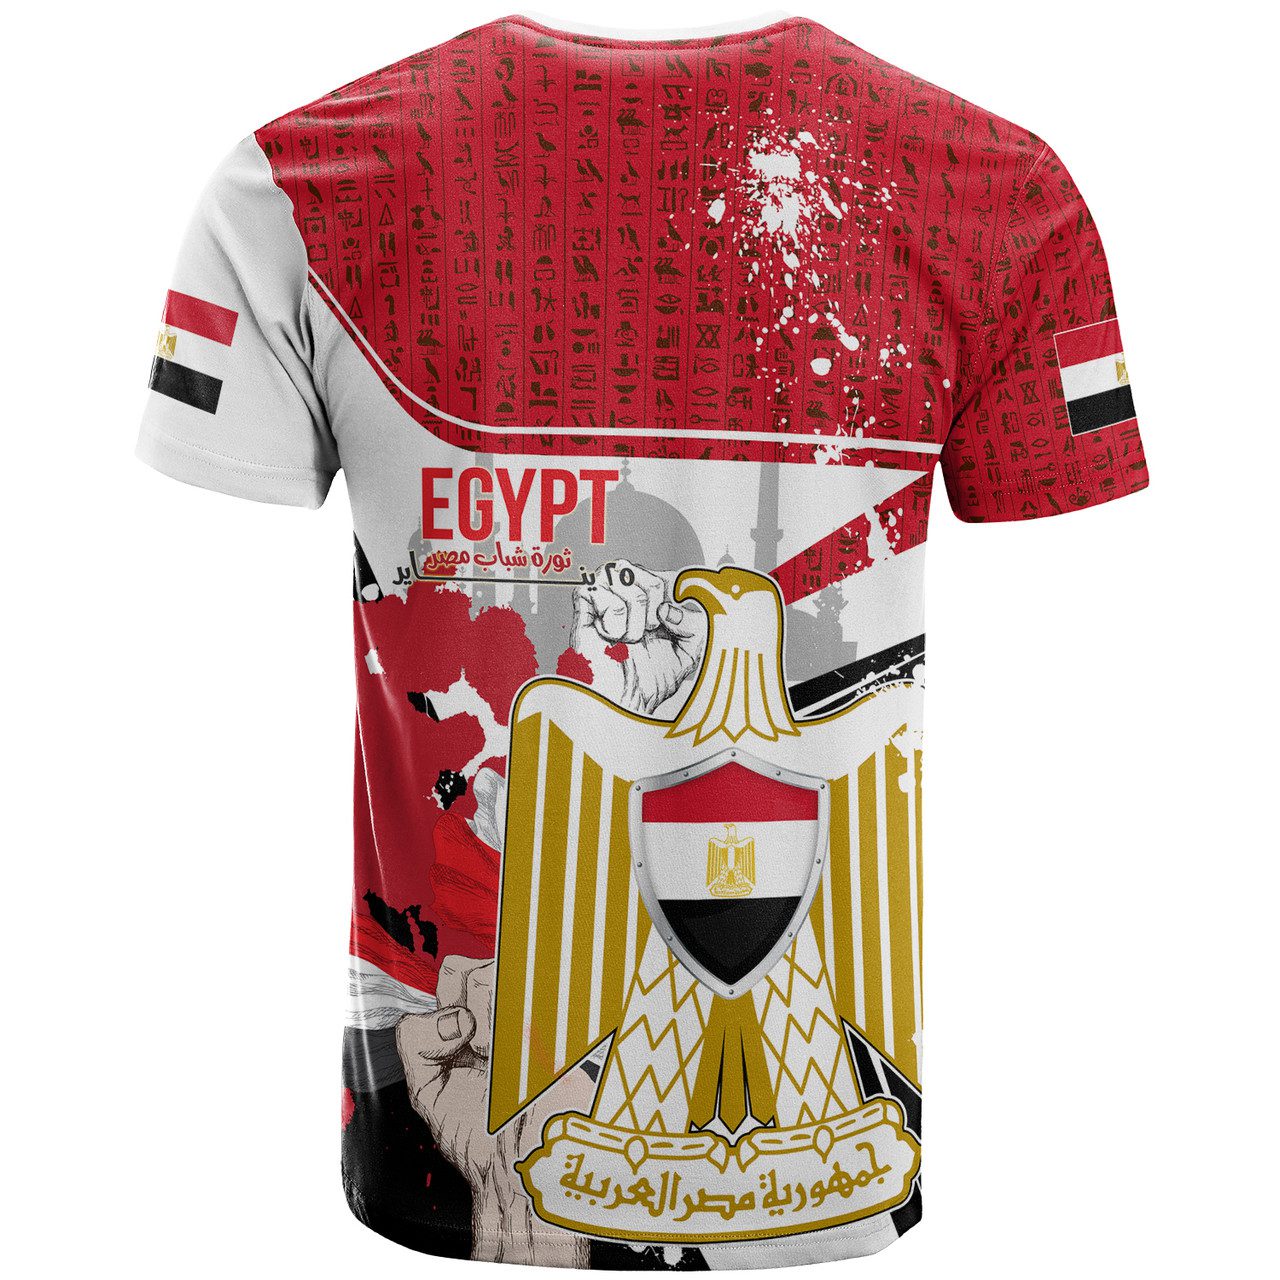 Egypt Independence Day T-shirt – Egypt Revolution Day With Egyptian Golden Eagle And Ancient Egyptian Hieroglyphs Splash T-shirt